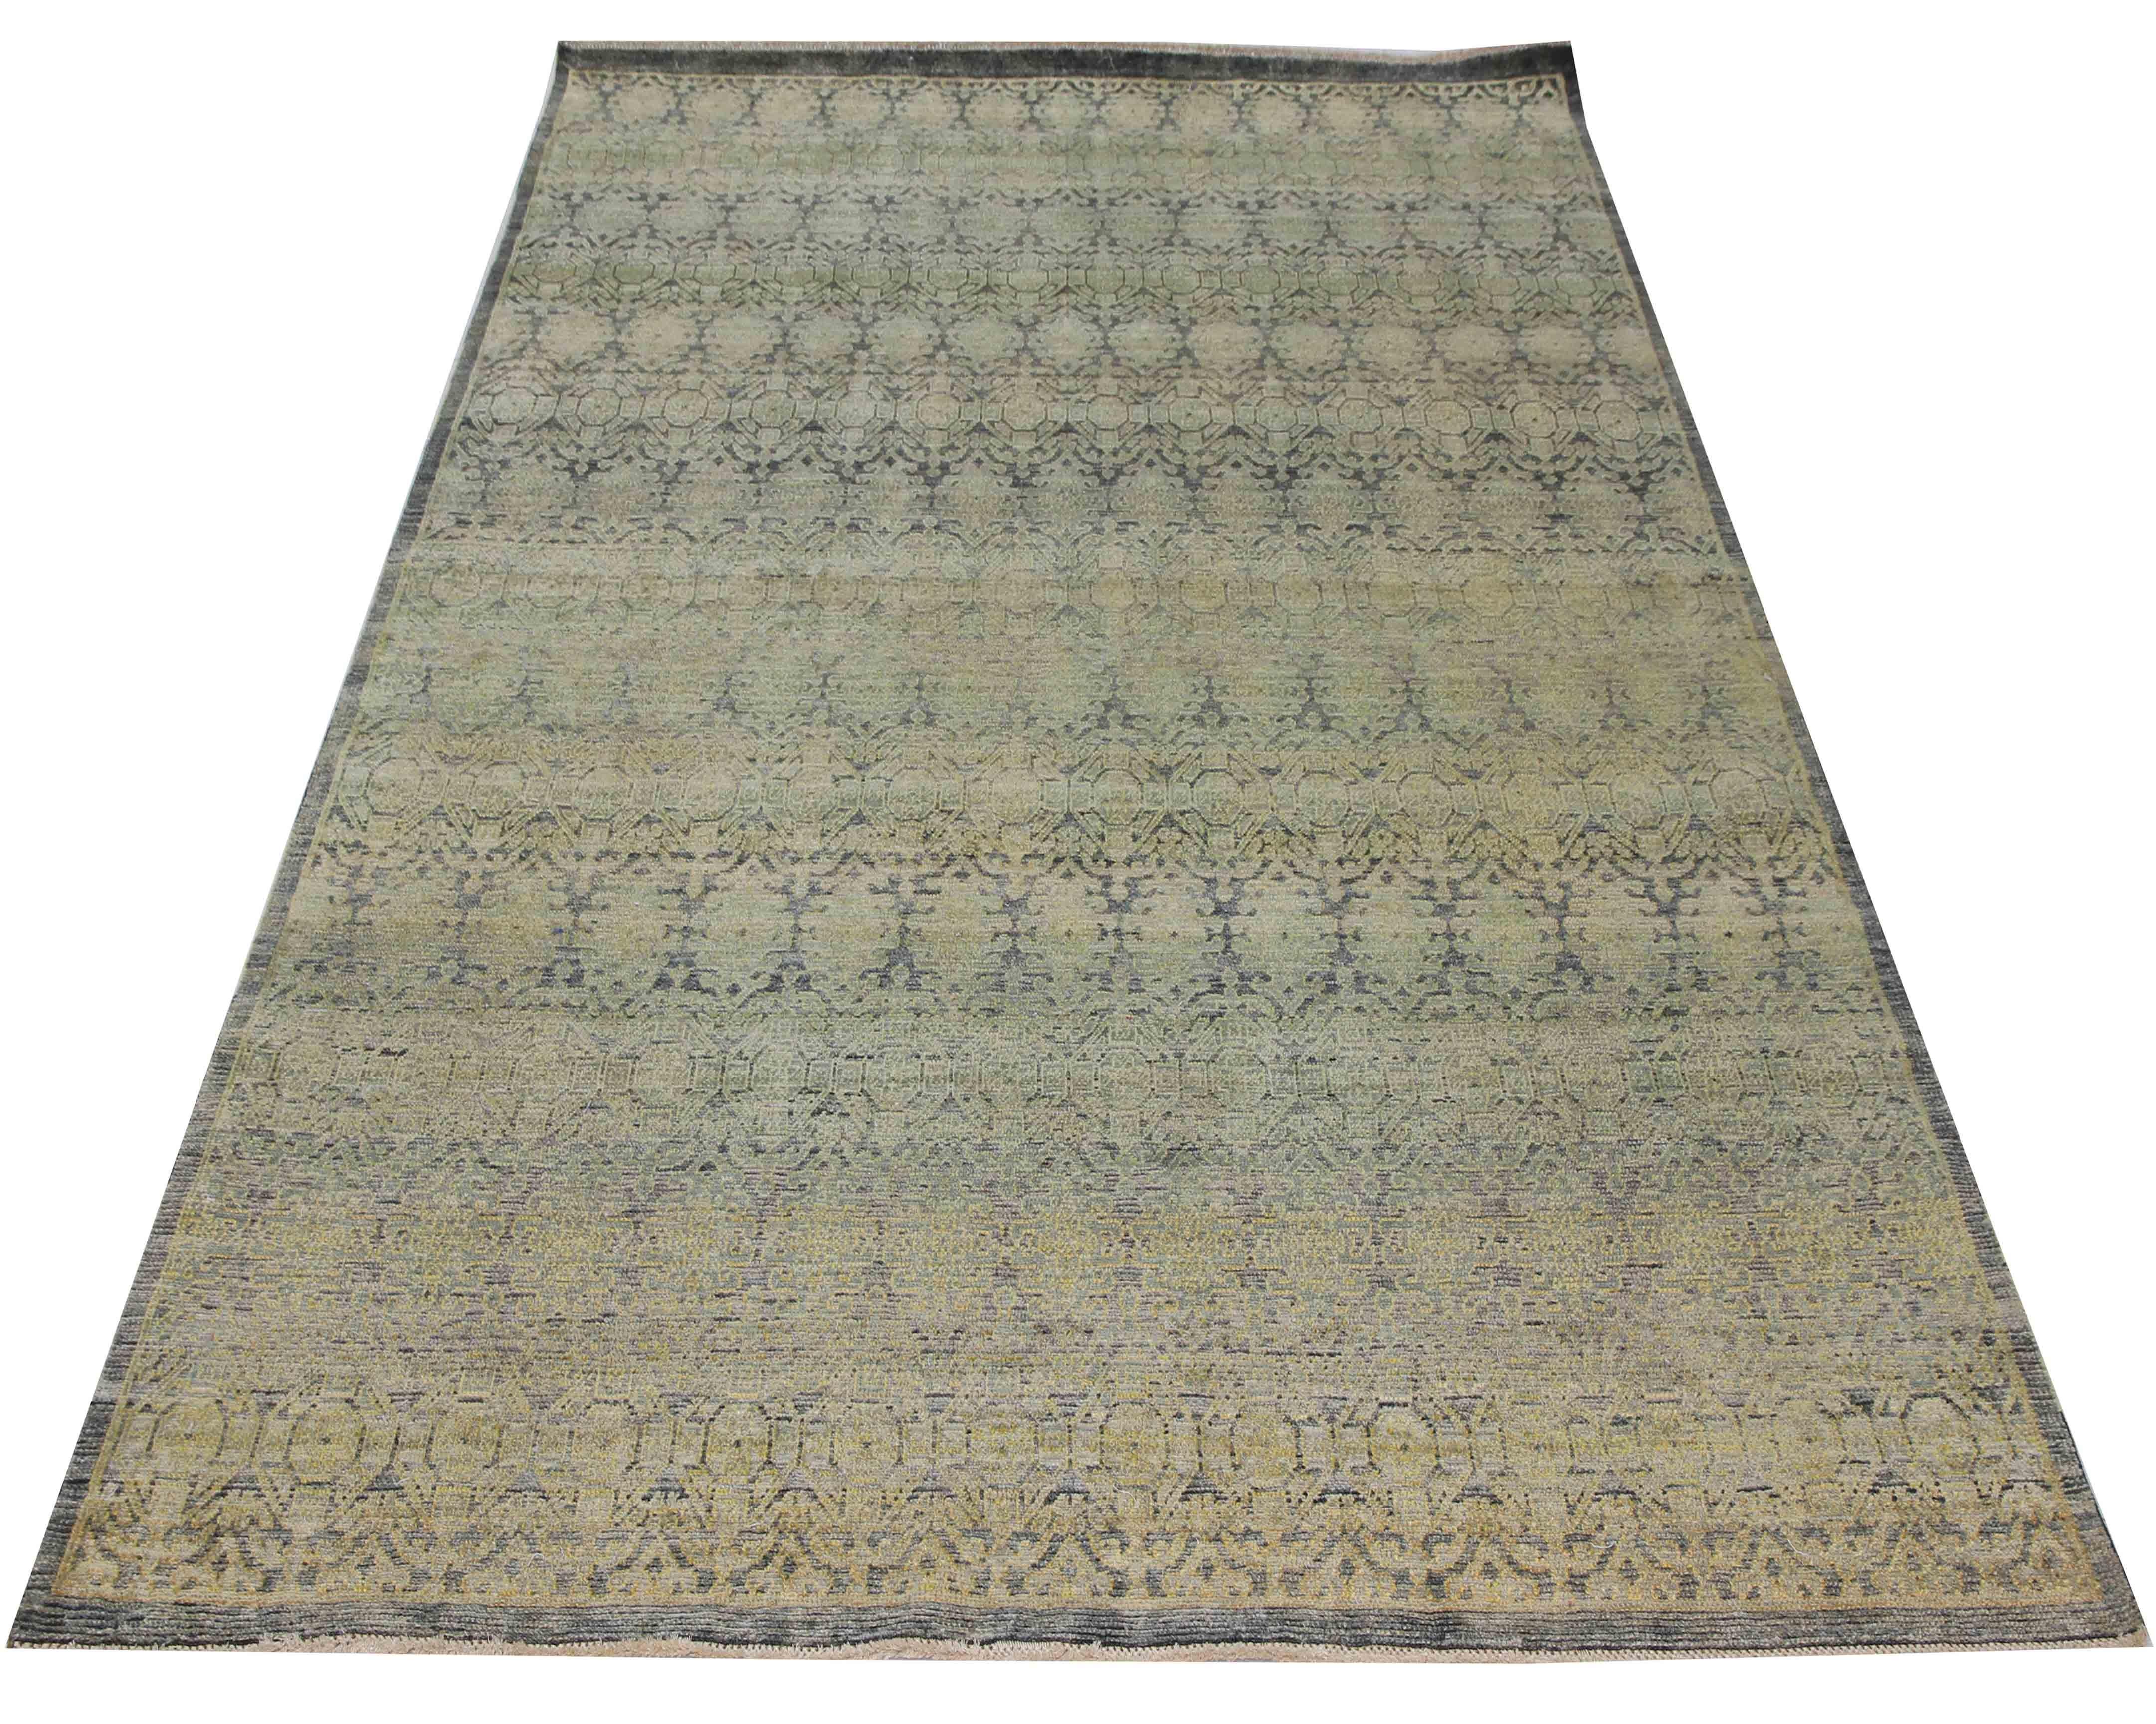 This rug is made from recycled wool from remote parts of India. Made from recycled wool fiber this piece was crafted using organic processes throughout every step of textile production. The traditional design is redefined as a contemporary rug